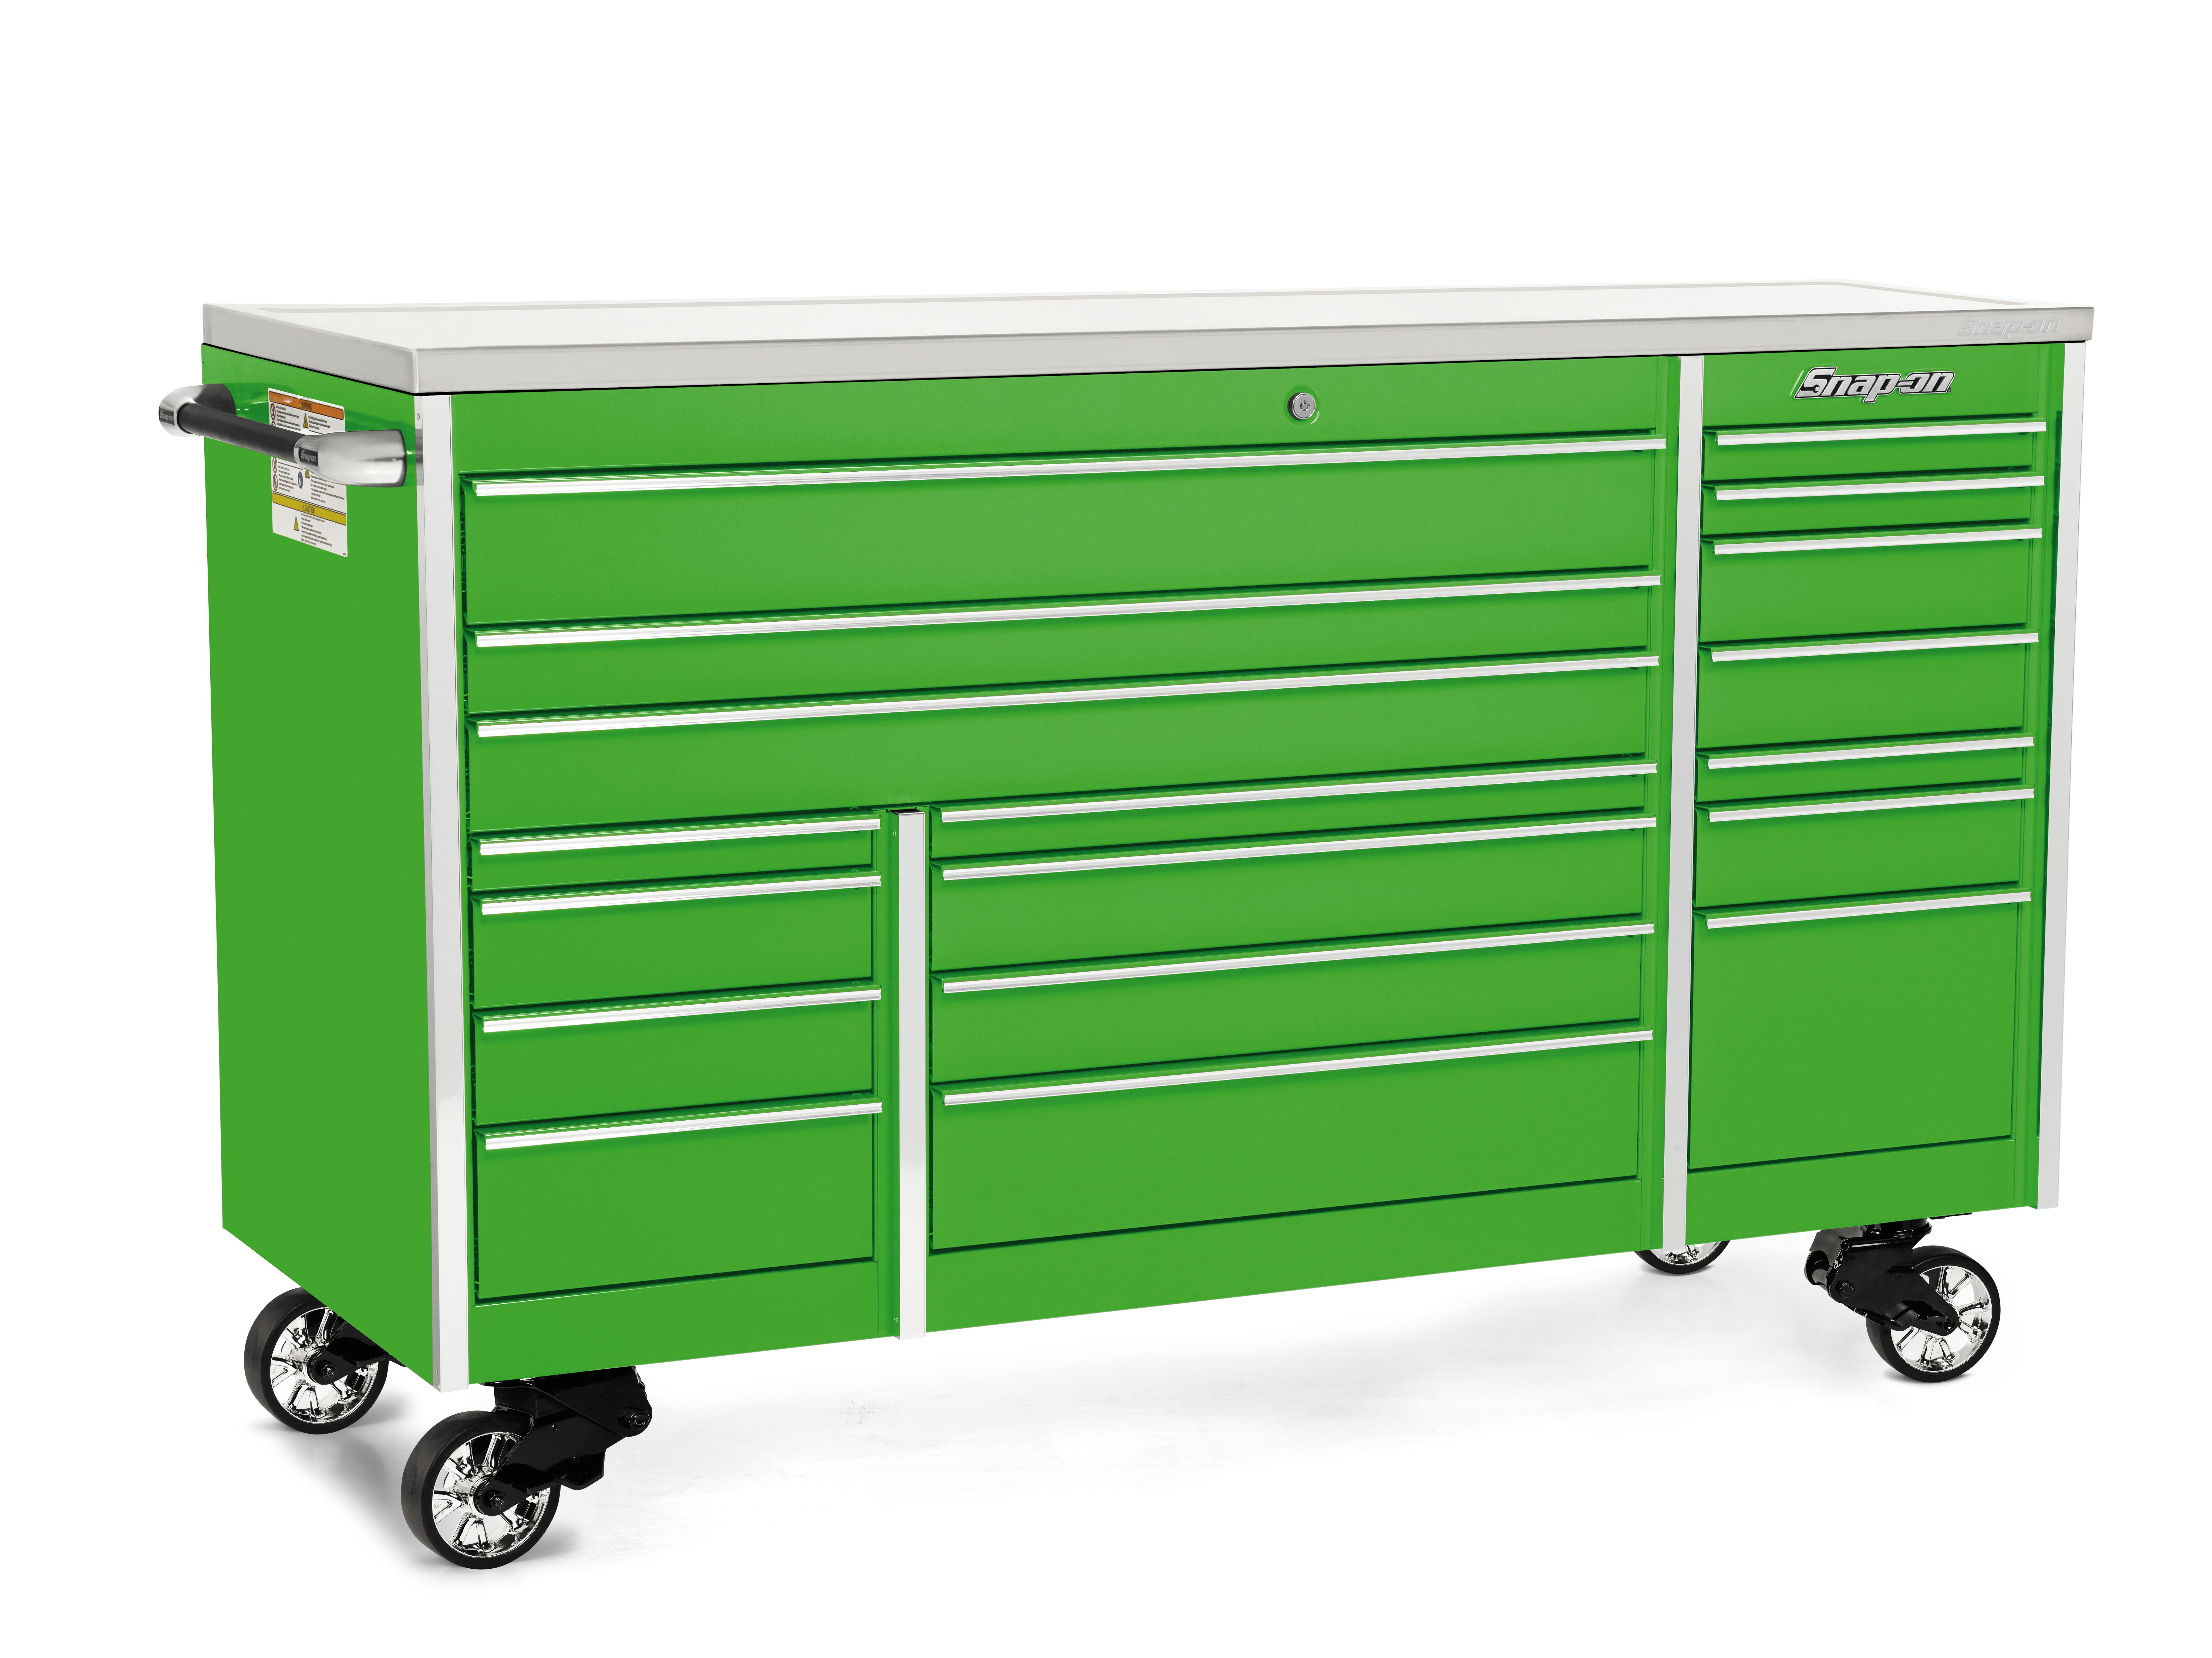 72 18-Drawer Triple-Bank Masters Series Stainless Steel Top Roll Cab ( Extreme Green), KTL1023APJJ1